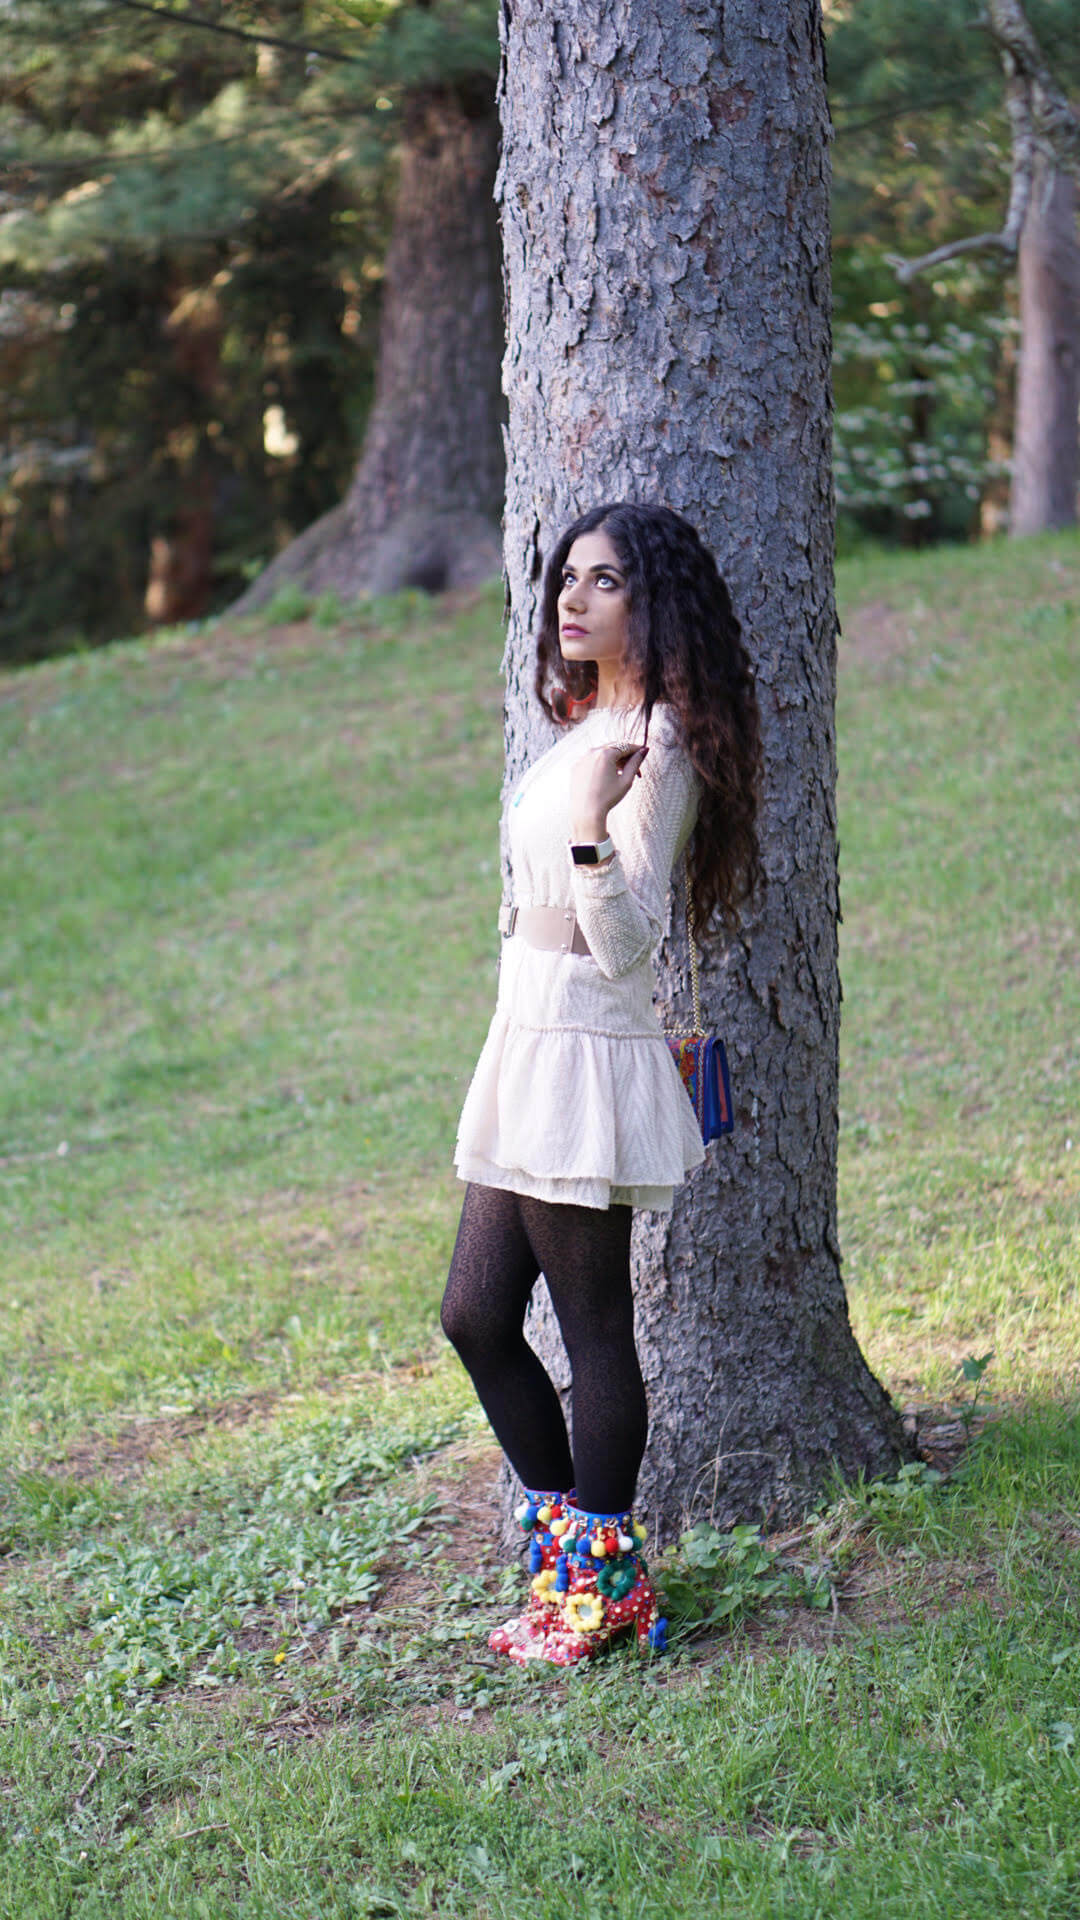 Software engineer and fashion blogger Abeer Kadhem feels completely at home in Rochester.